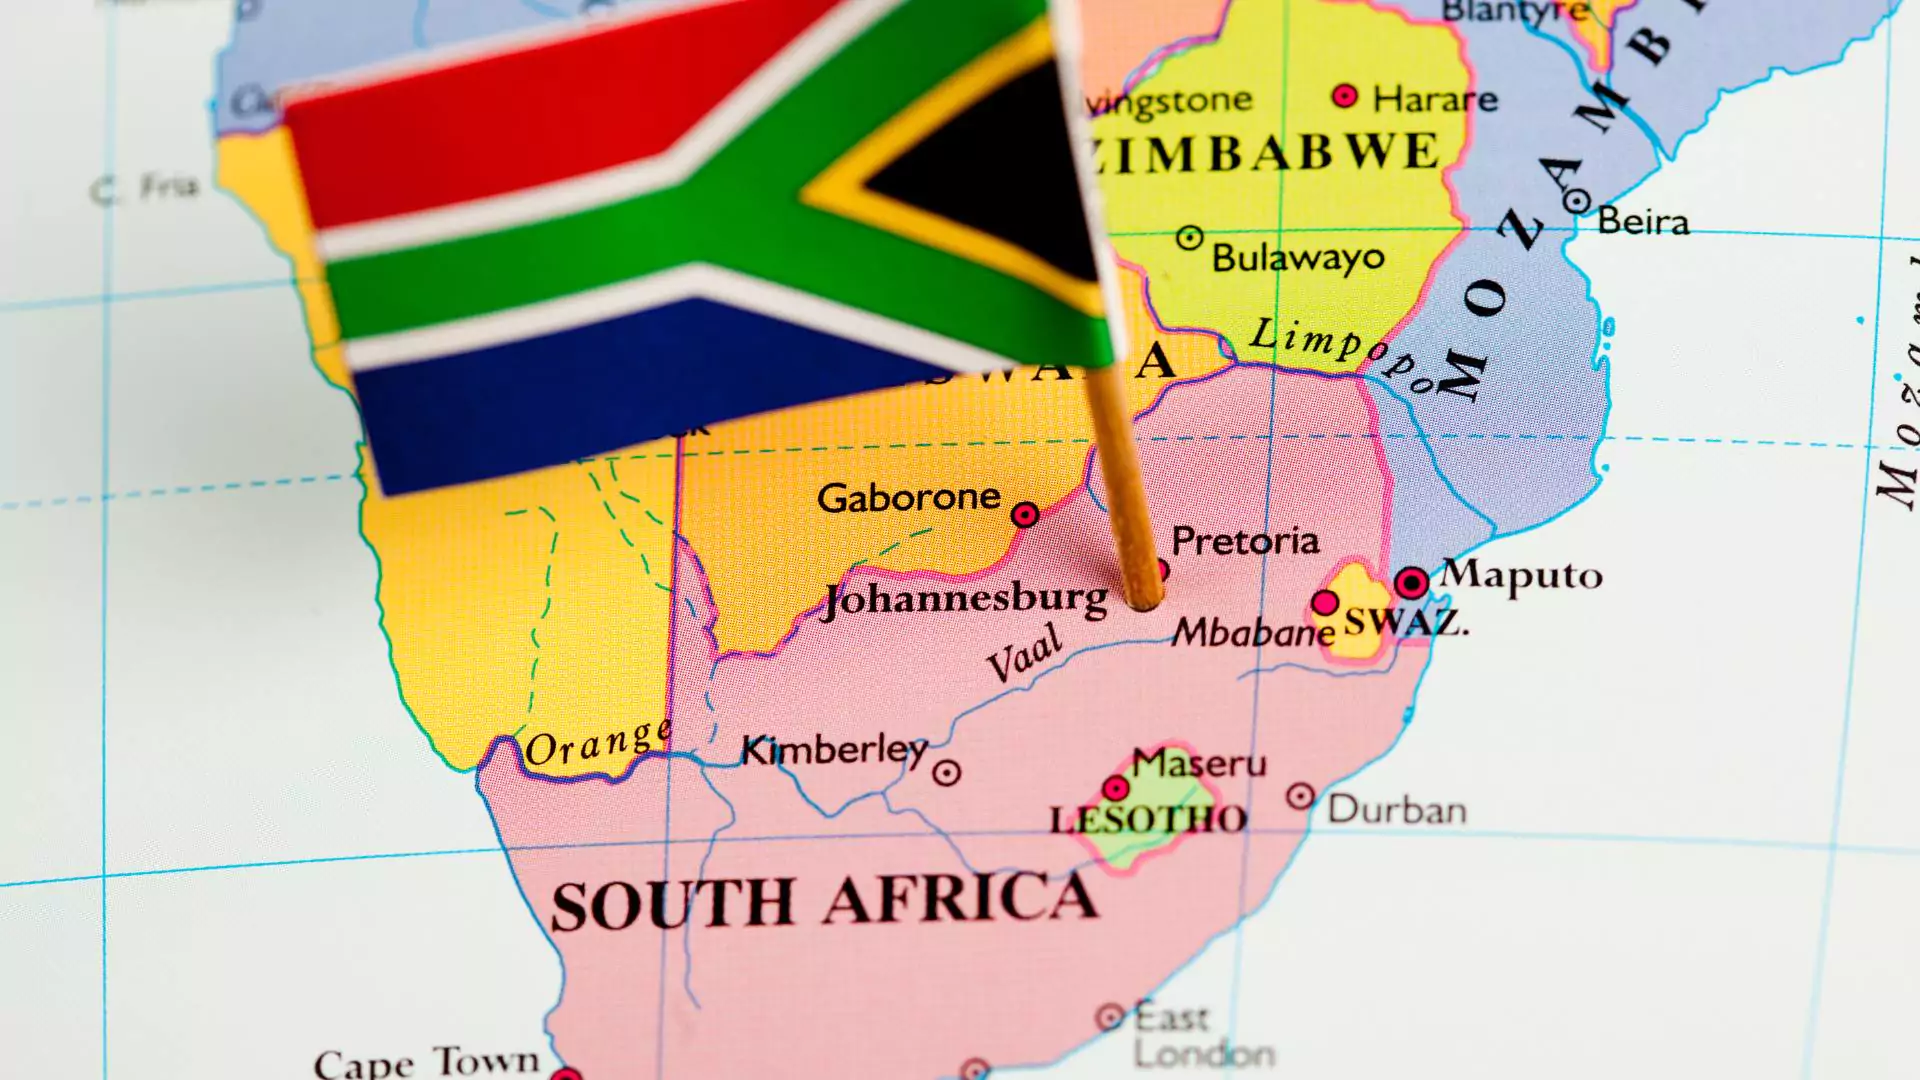 10 Essential Safety Tips When Travelling to South Africa - Featured Image